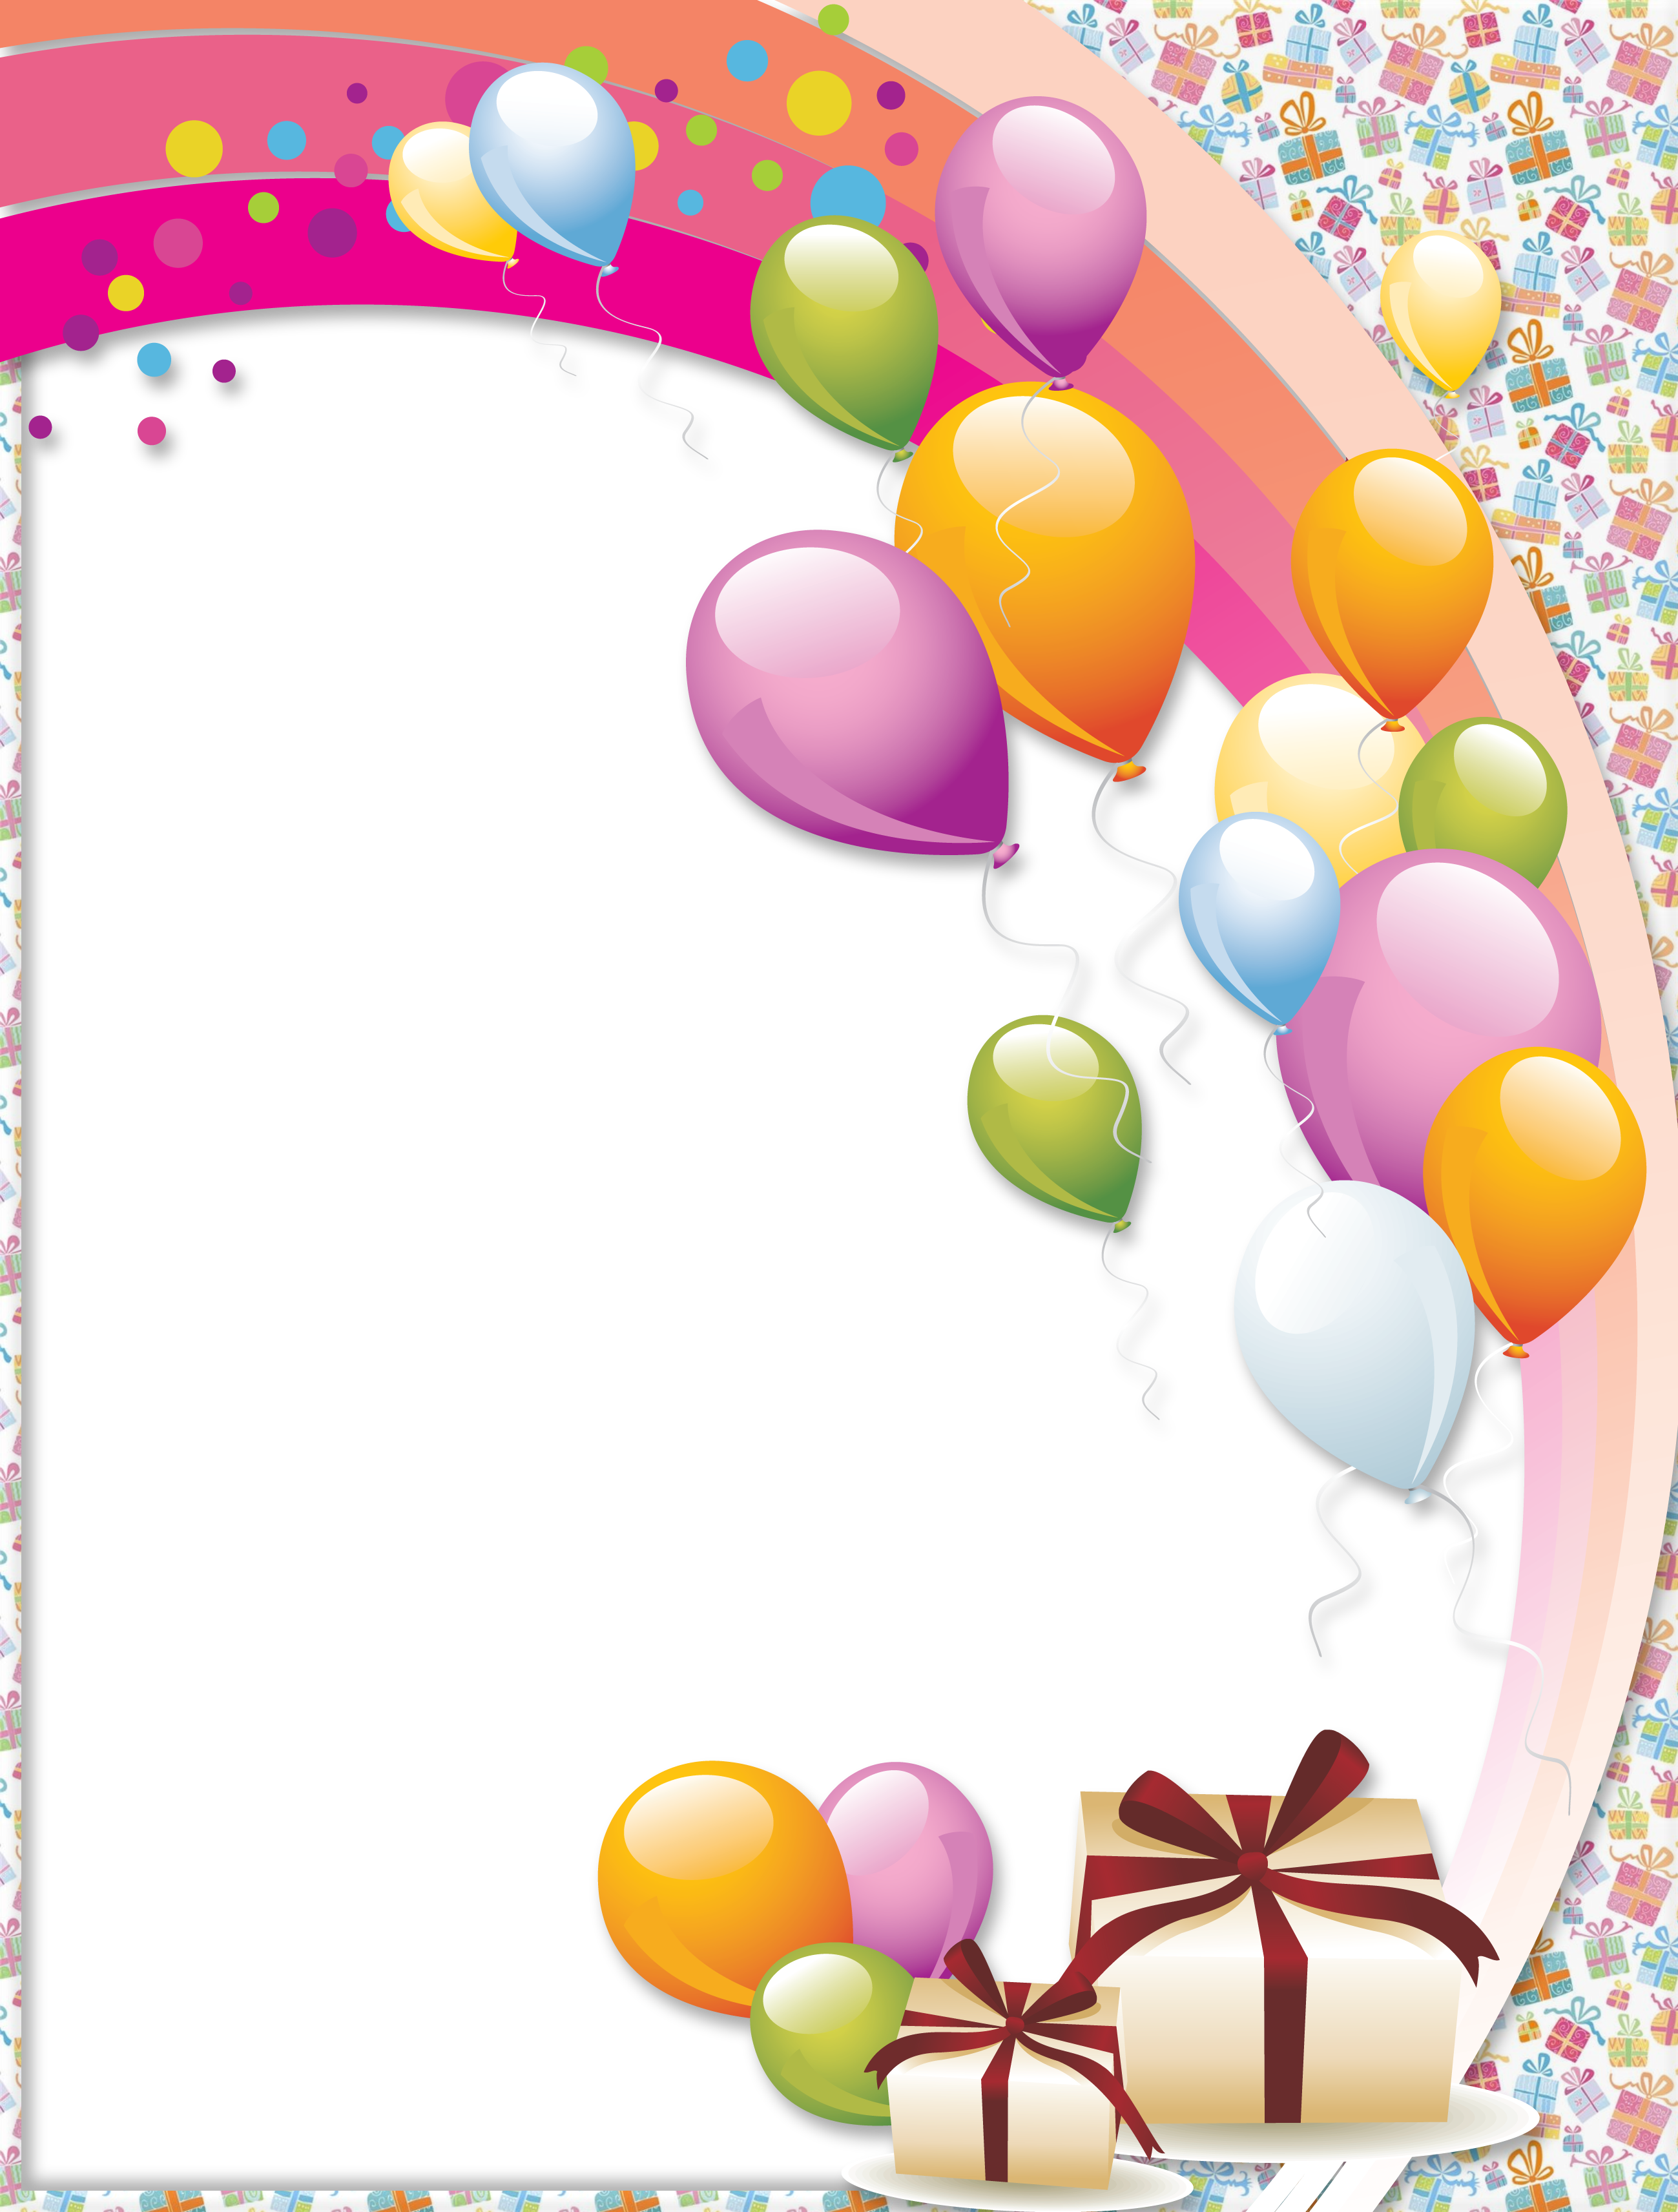 Lego clipart label. Transparent birthday frame gallery